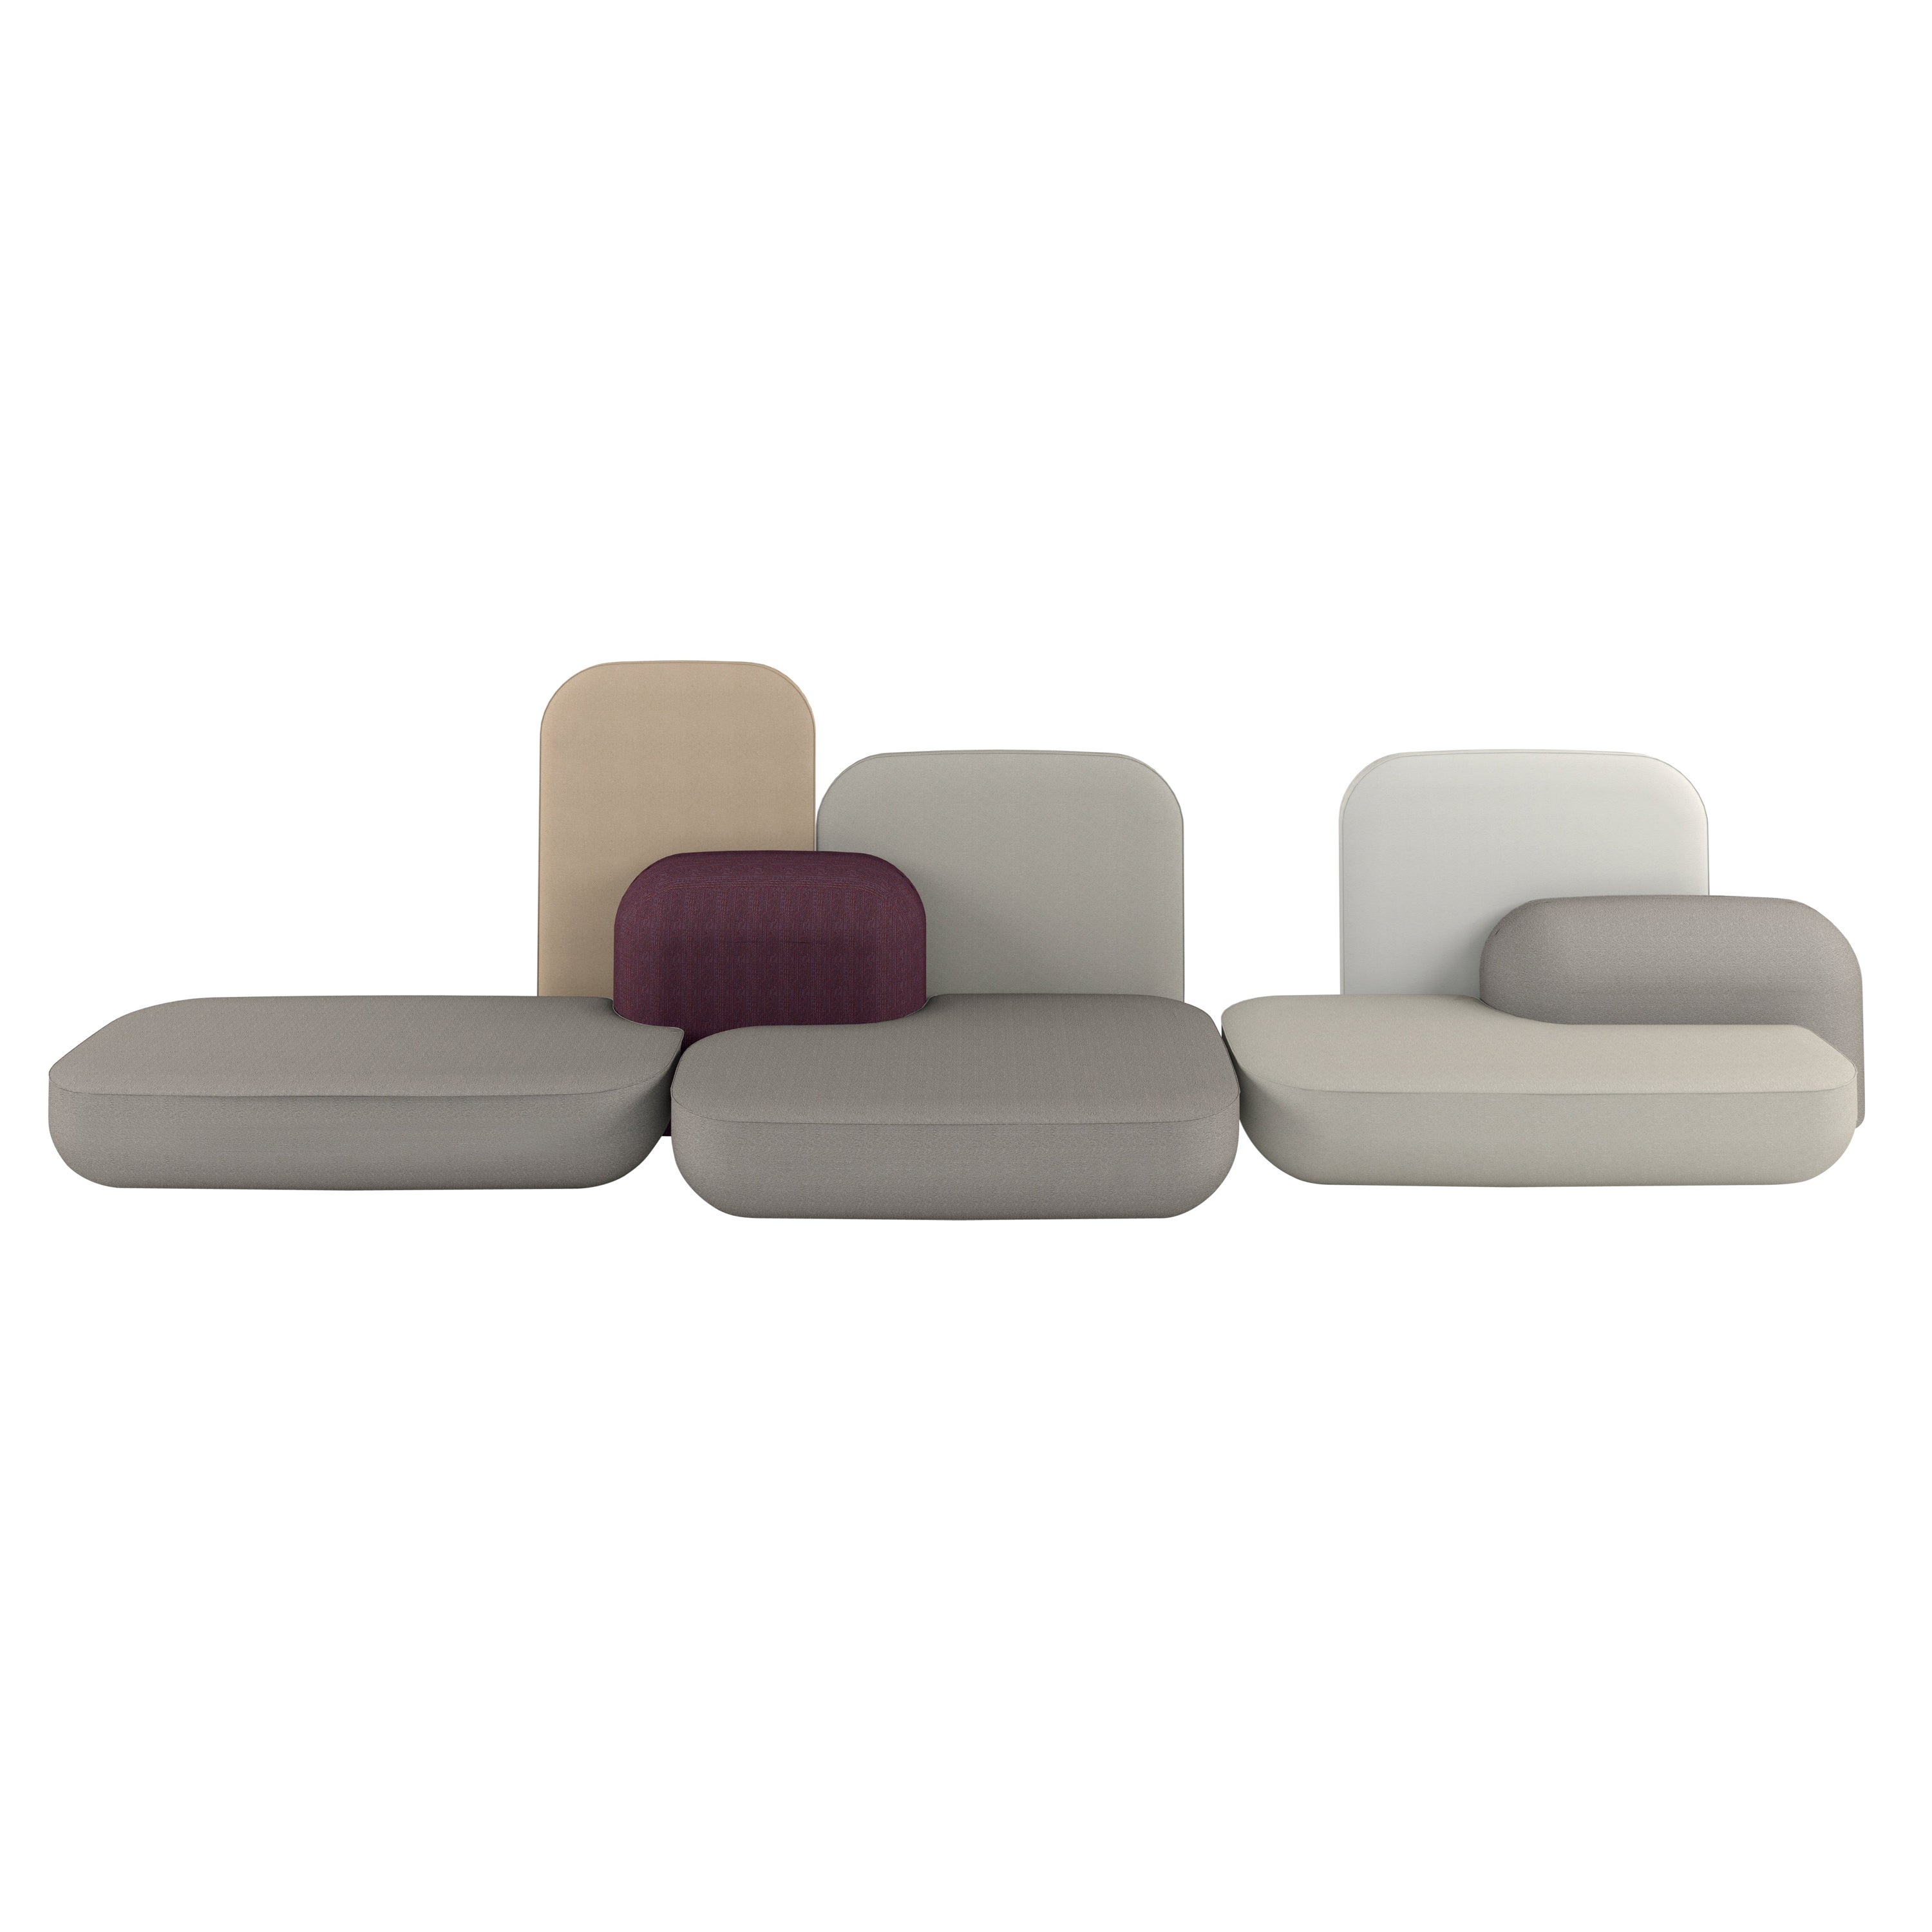 Alias Okome 008 Set of Grey and Beige Upholstered Seats with Backrest by Nendo